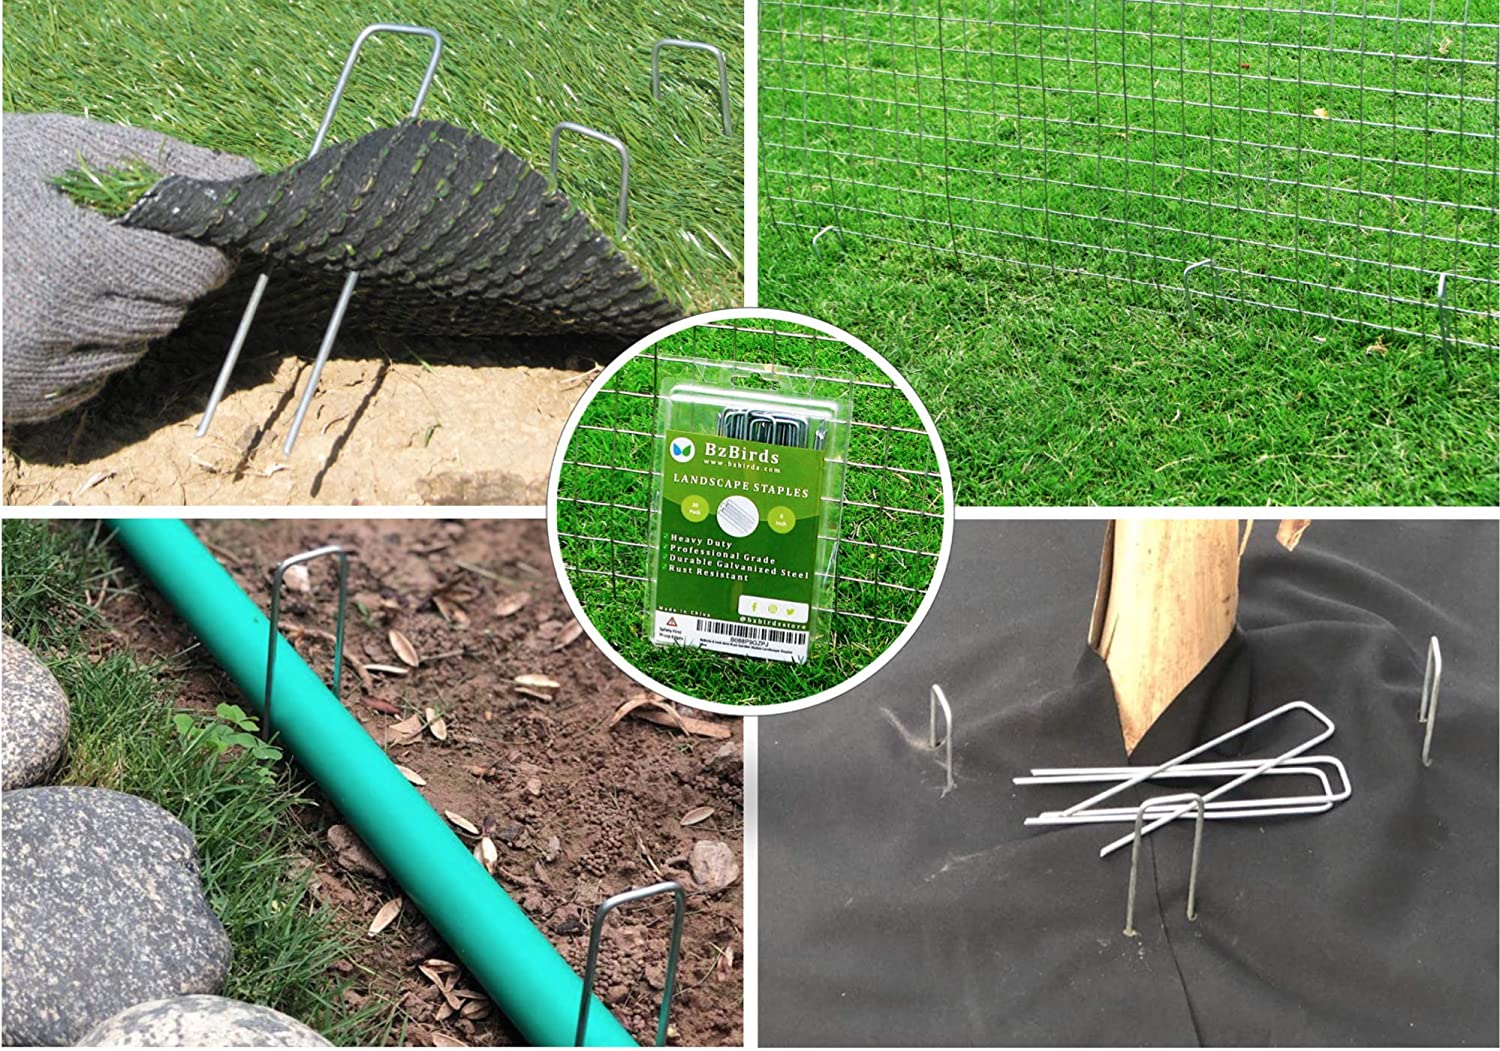 Dog Fence Lawn Securing Ground Cover ZGR Galvanized Landscape Staples 6 Inch Sturdy Rust Resistant Gardening Supplies Garden Staple for Install Artificial Grass Soaker Hose 100 Pack 11 Gauge 